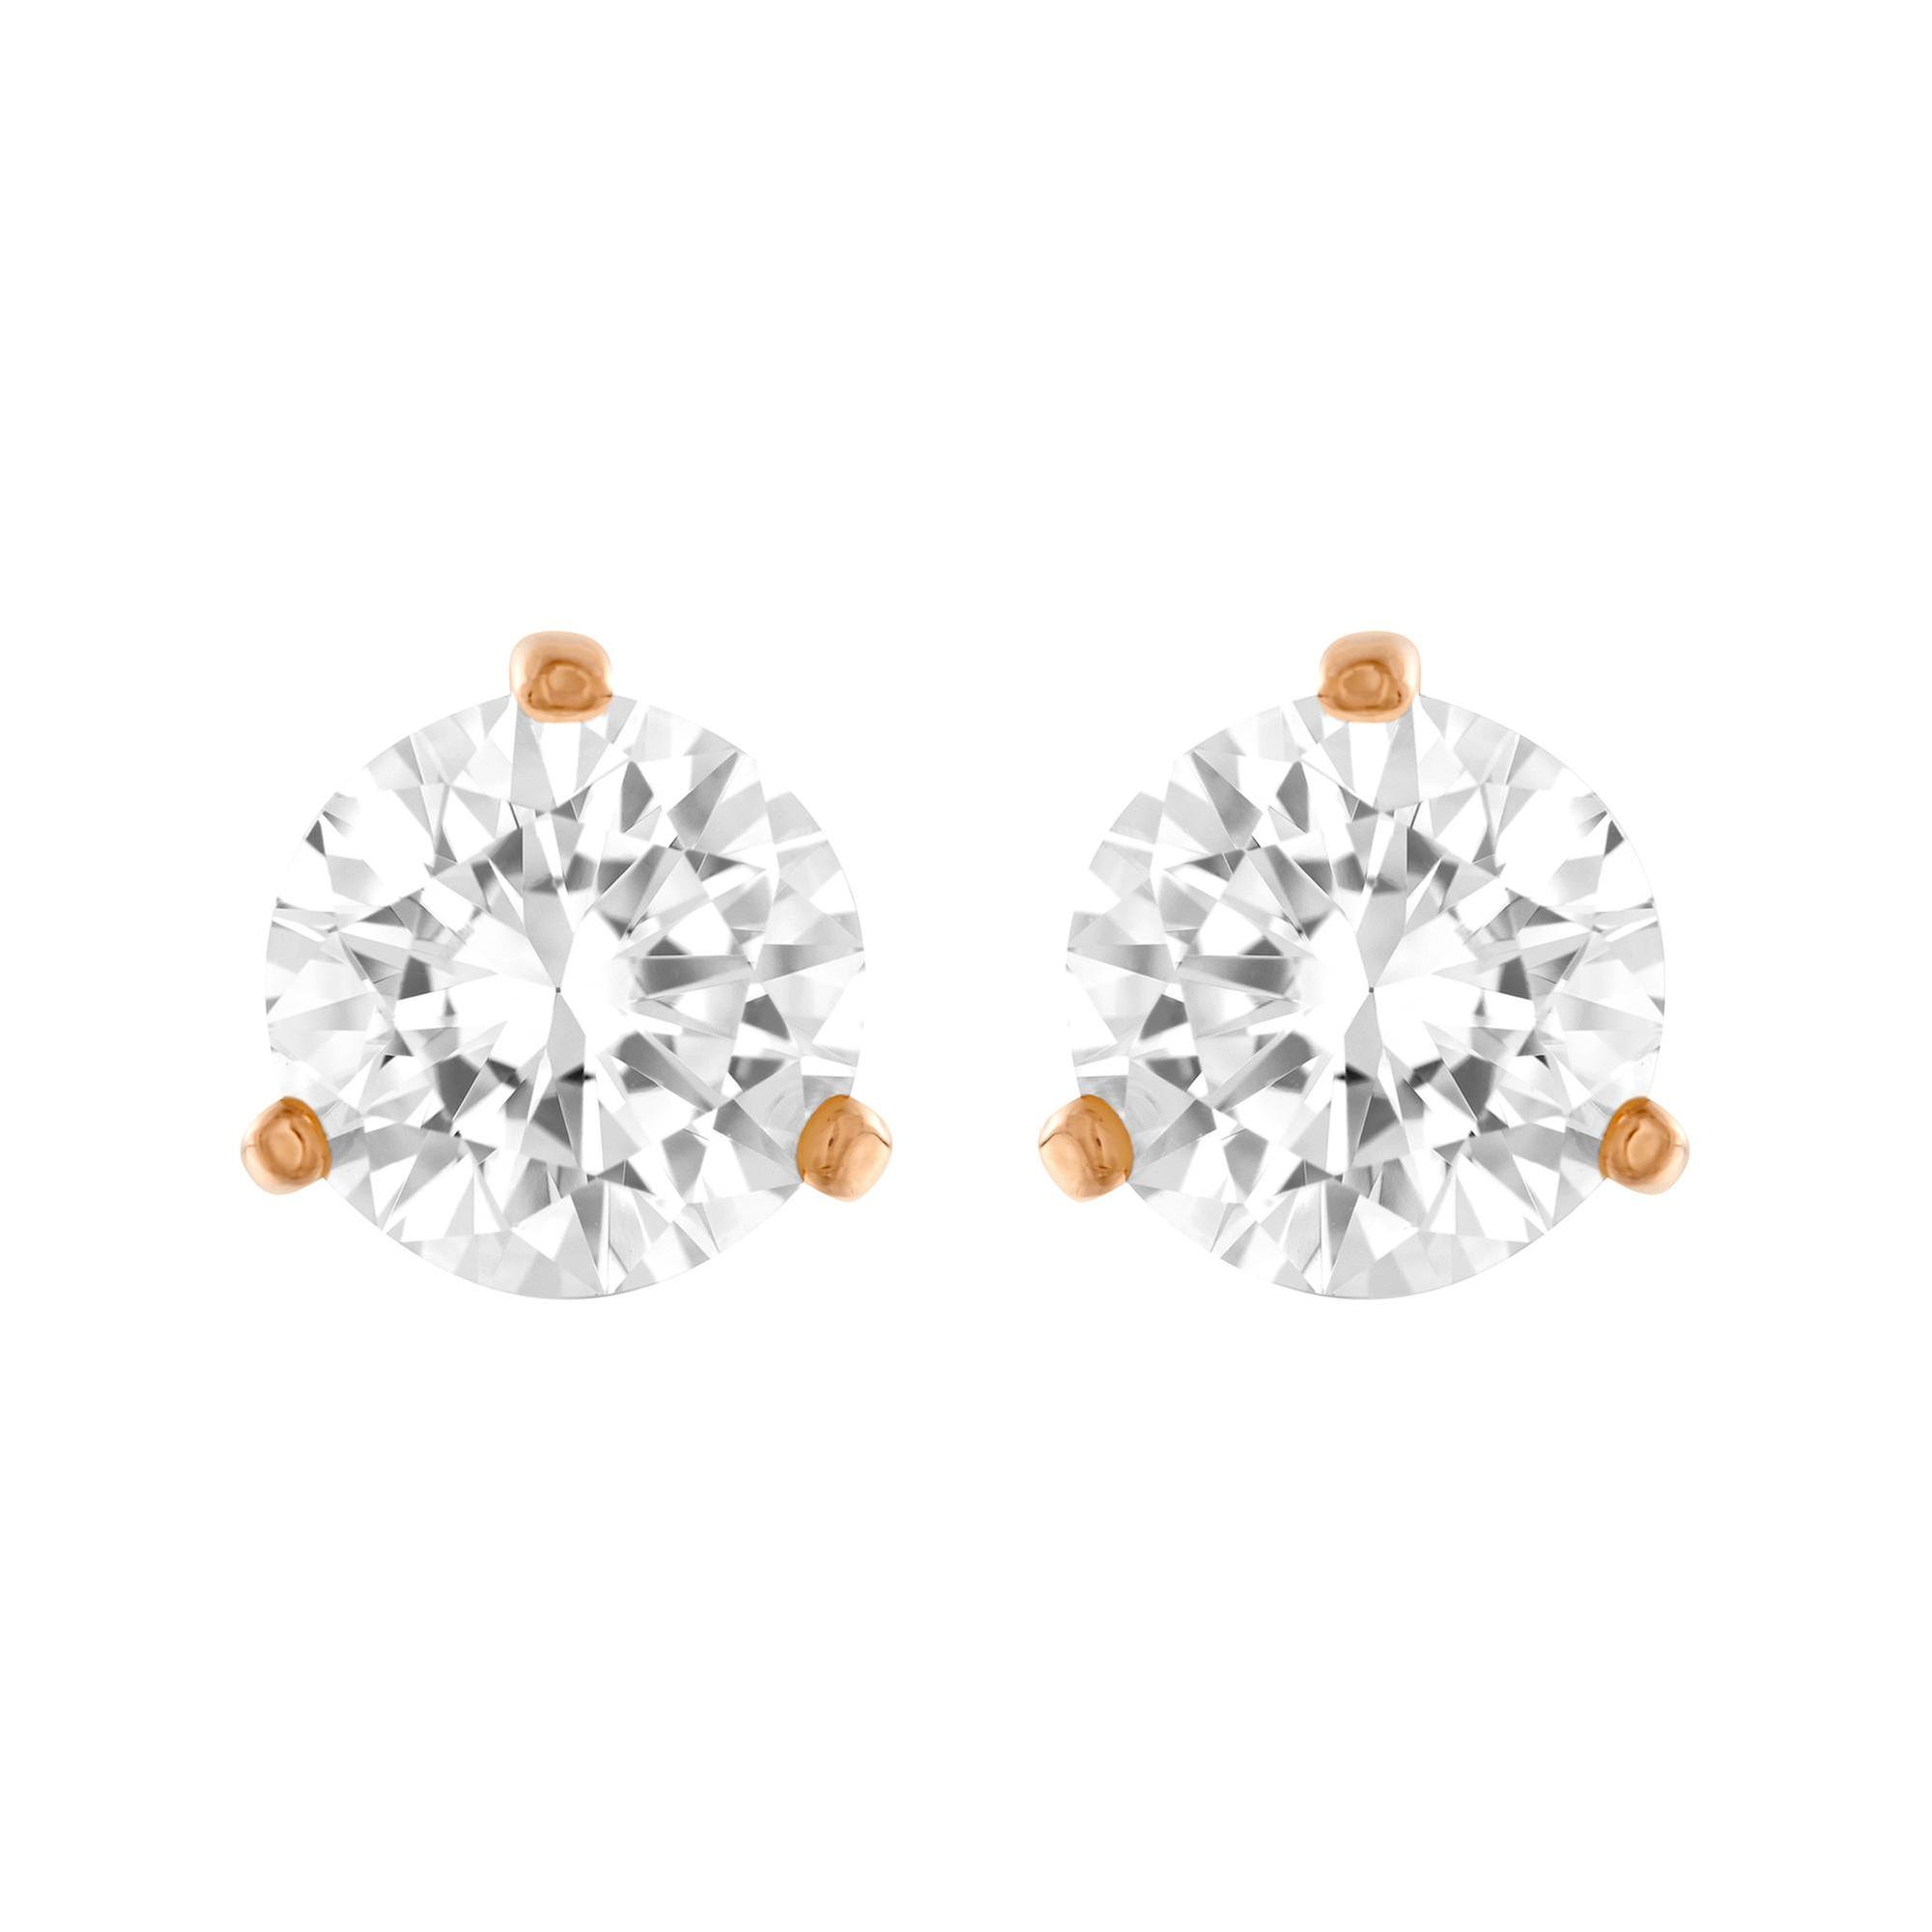 Swarovski Crystal Rose Gold-Plated Solitaire Earrings